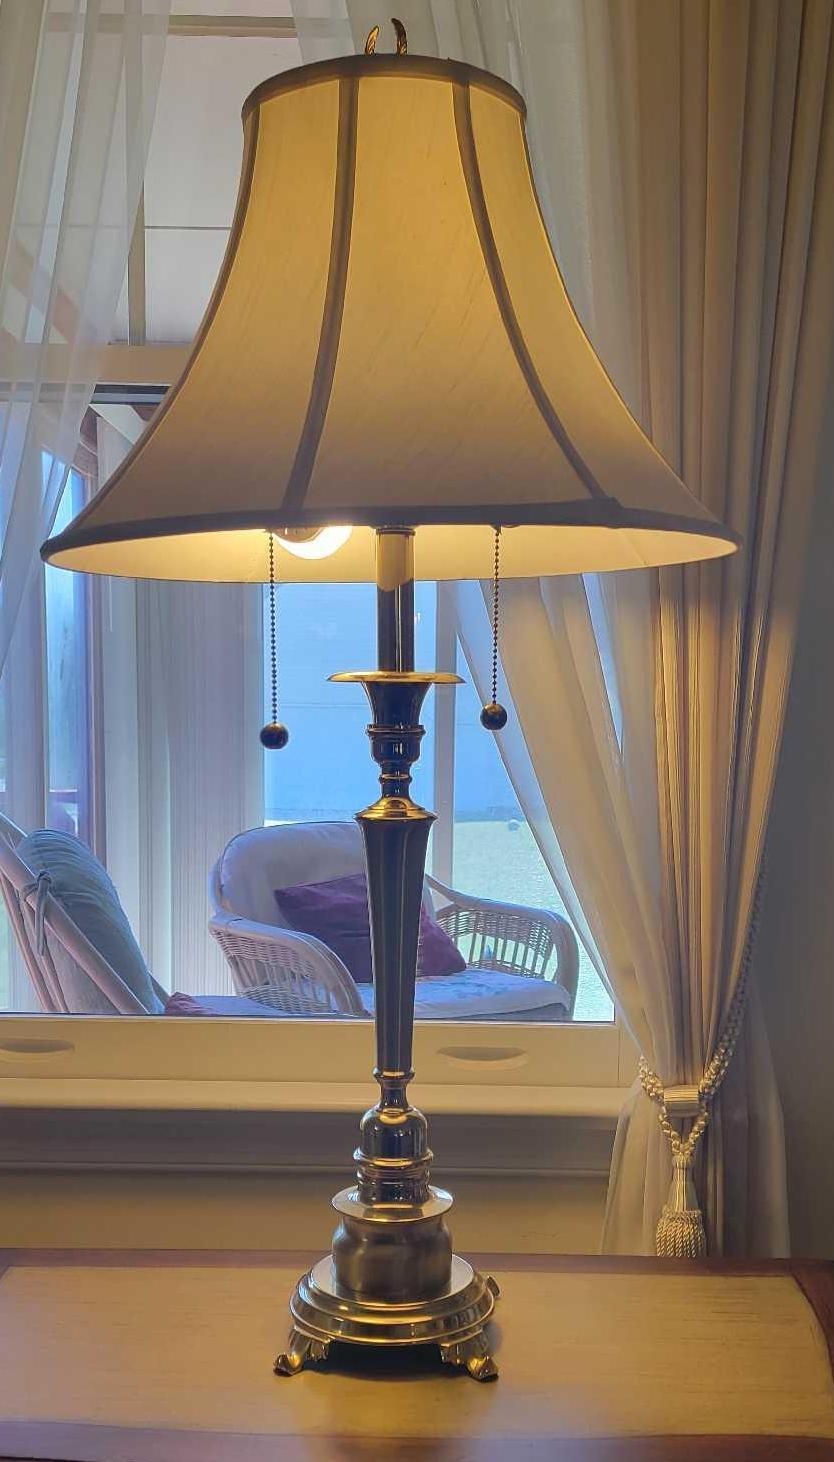 Brass Table Lamp $10 STS